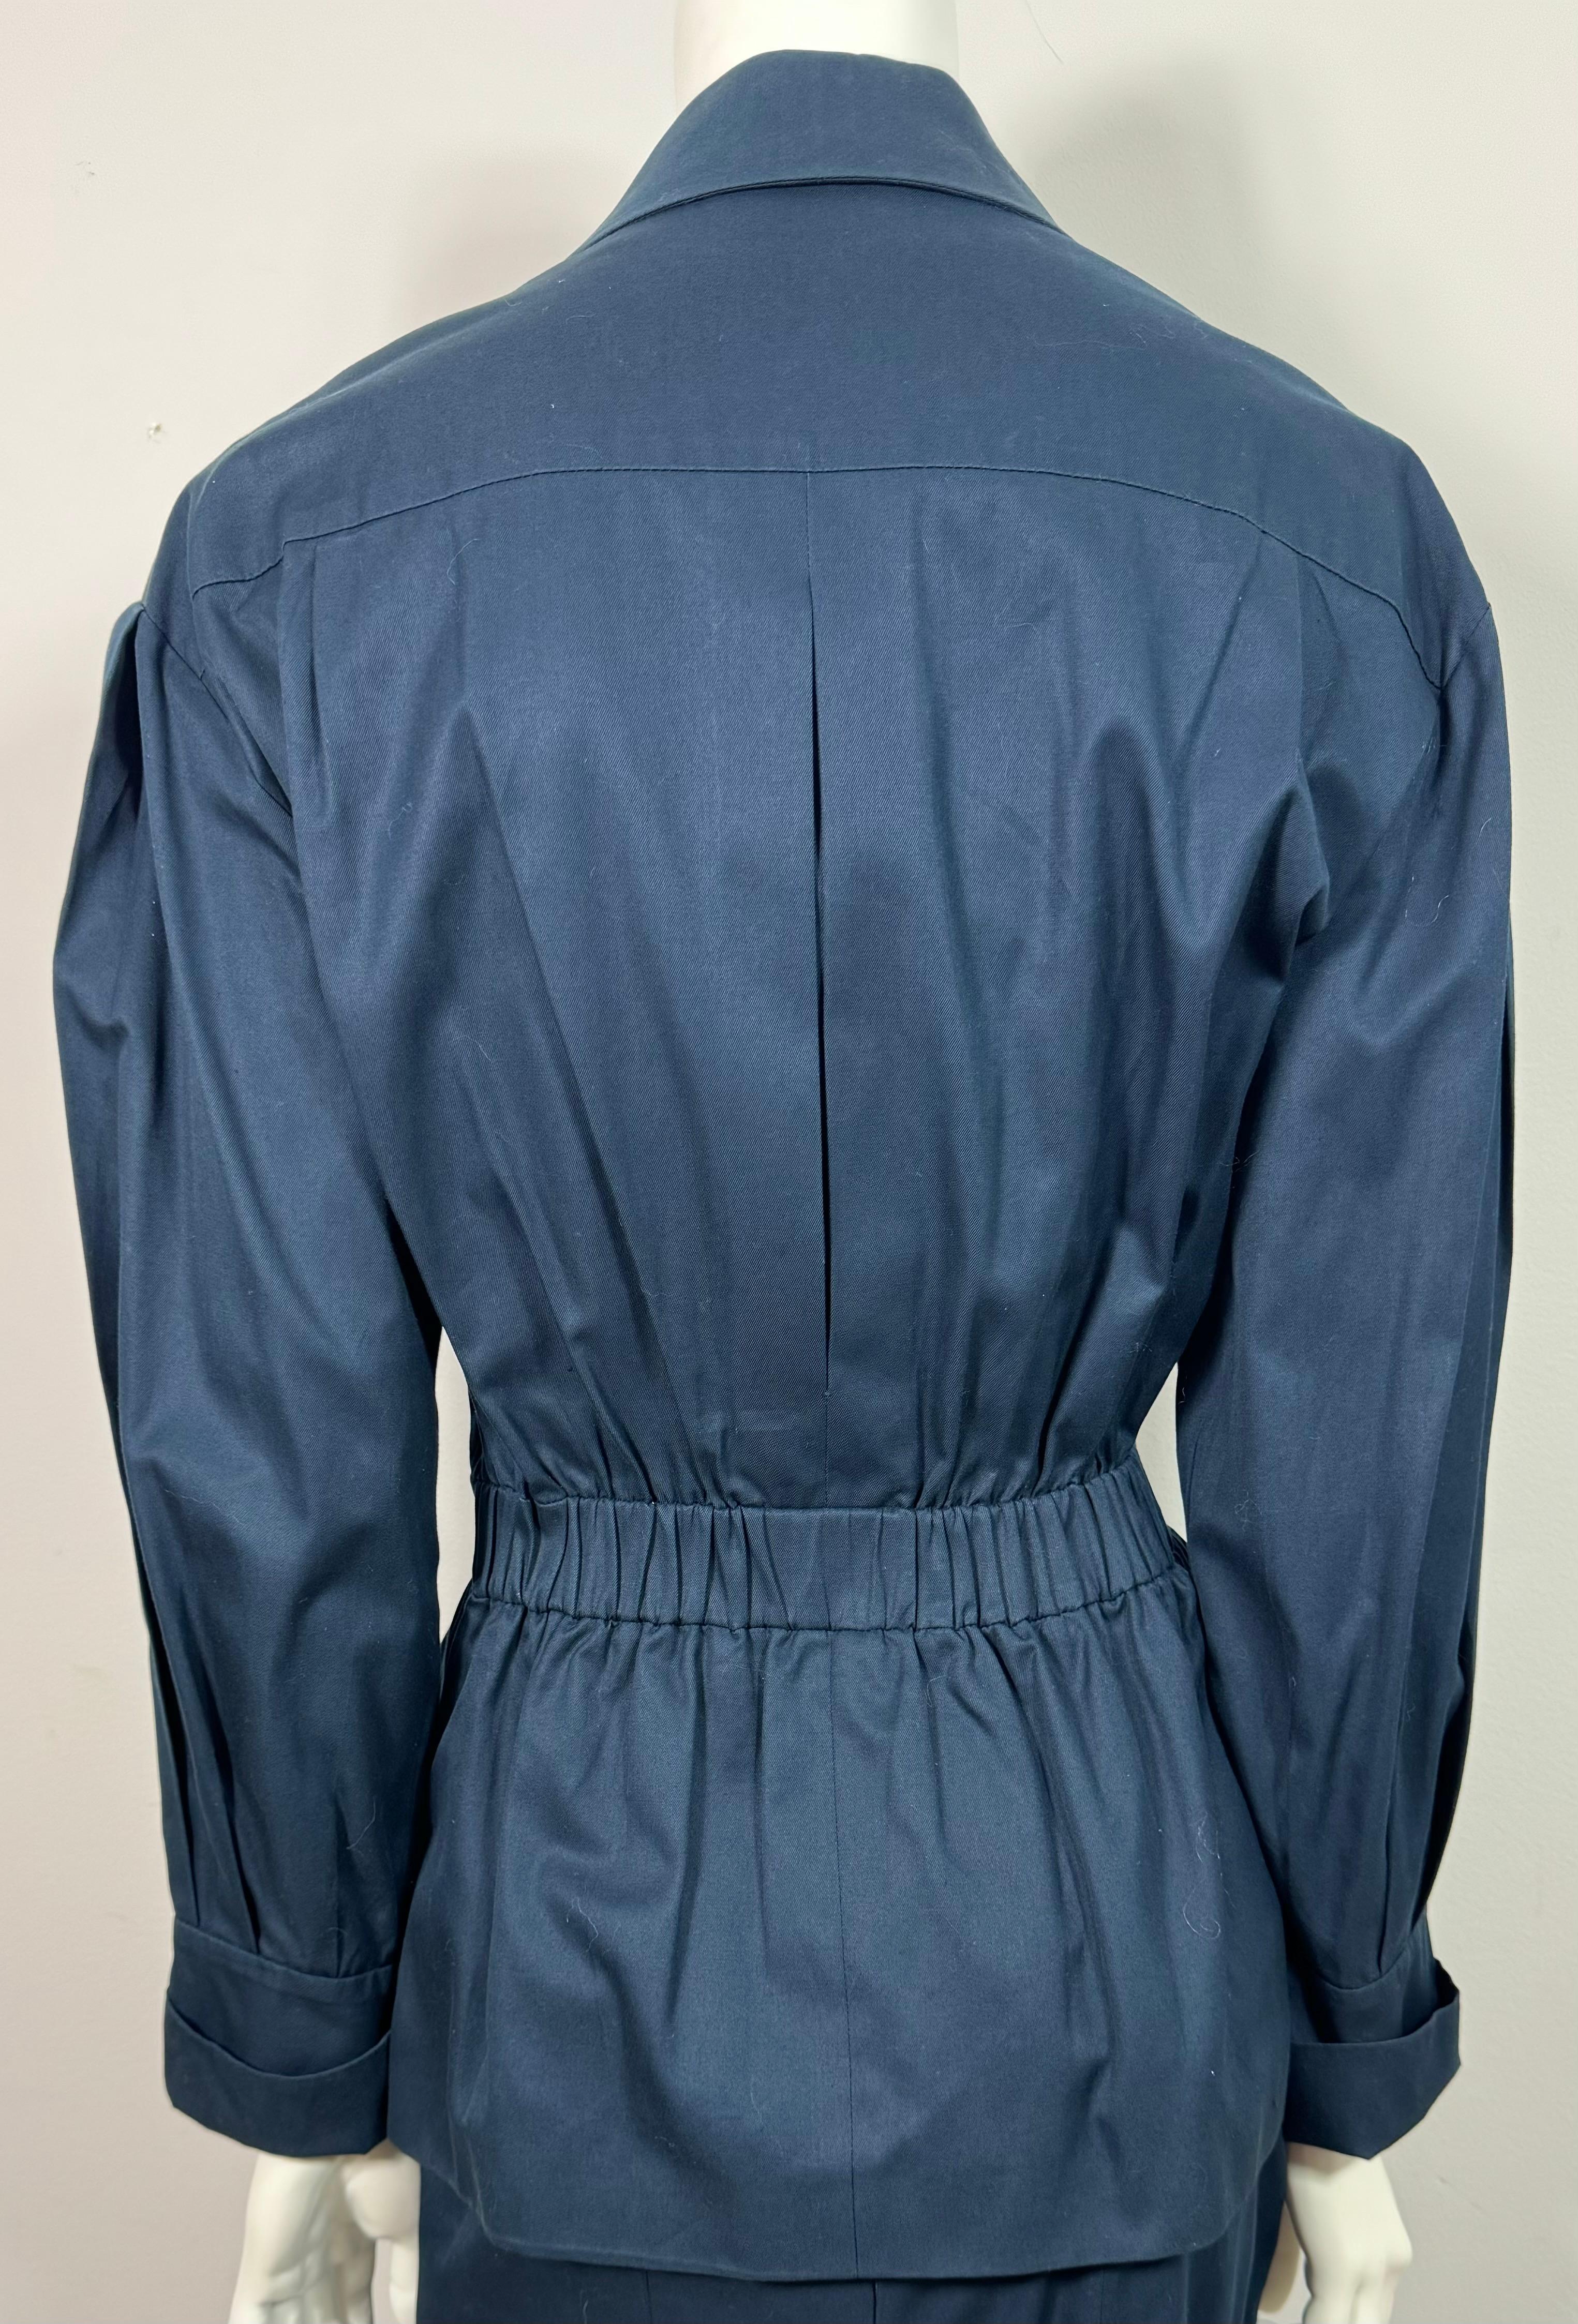 Chanel 1980's Navy Cotton Cinched Waist Jacket Skirt Suit - Size 38 For Sale 9